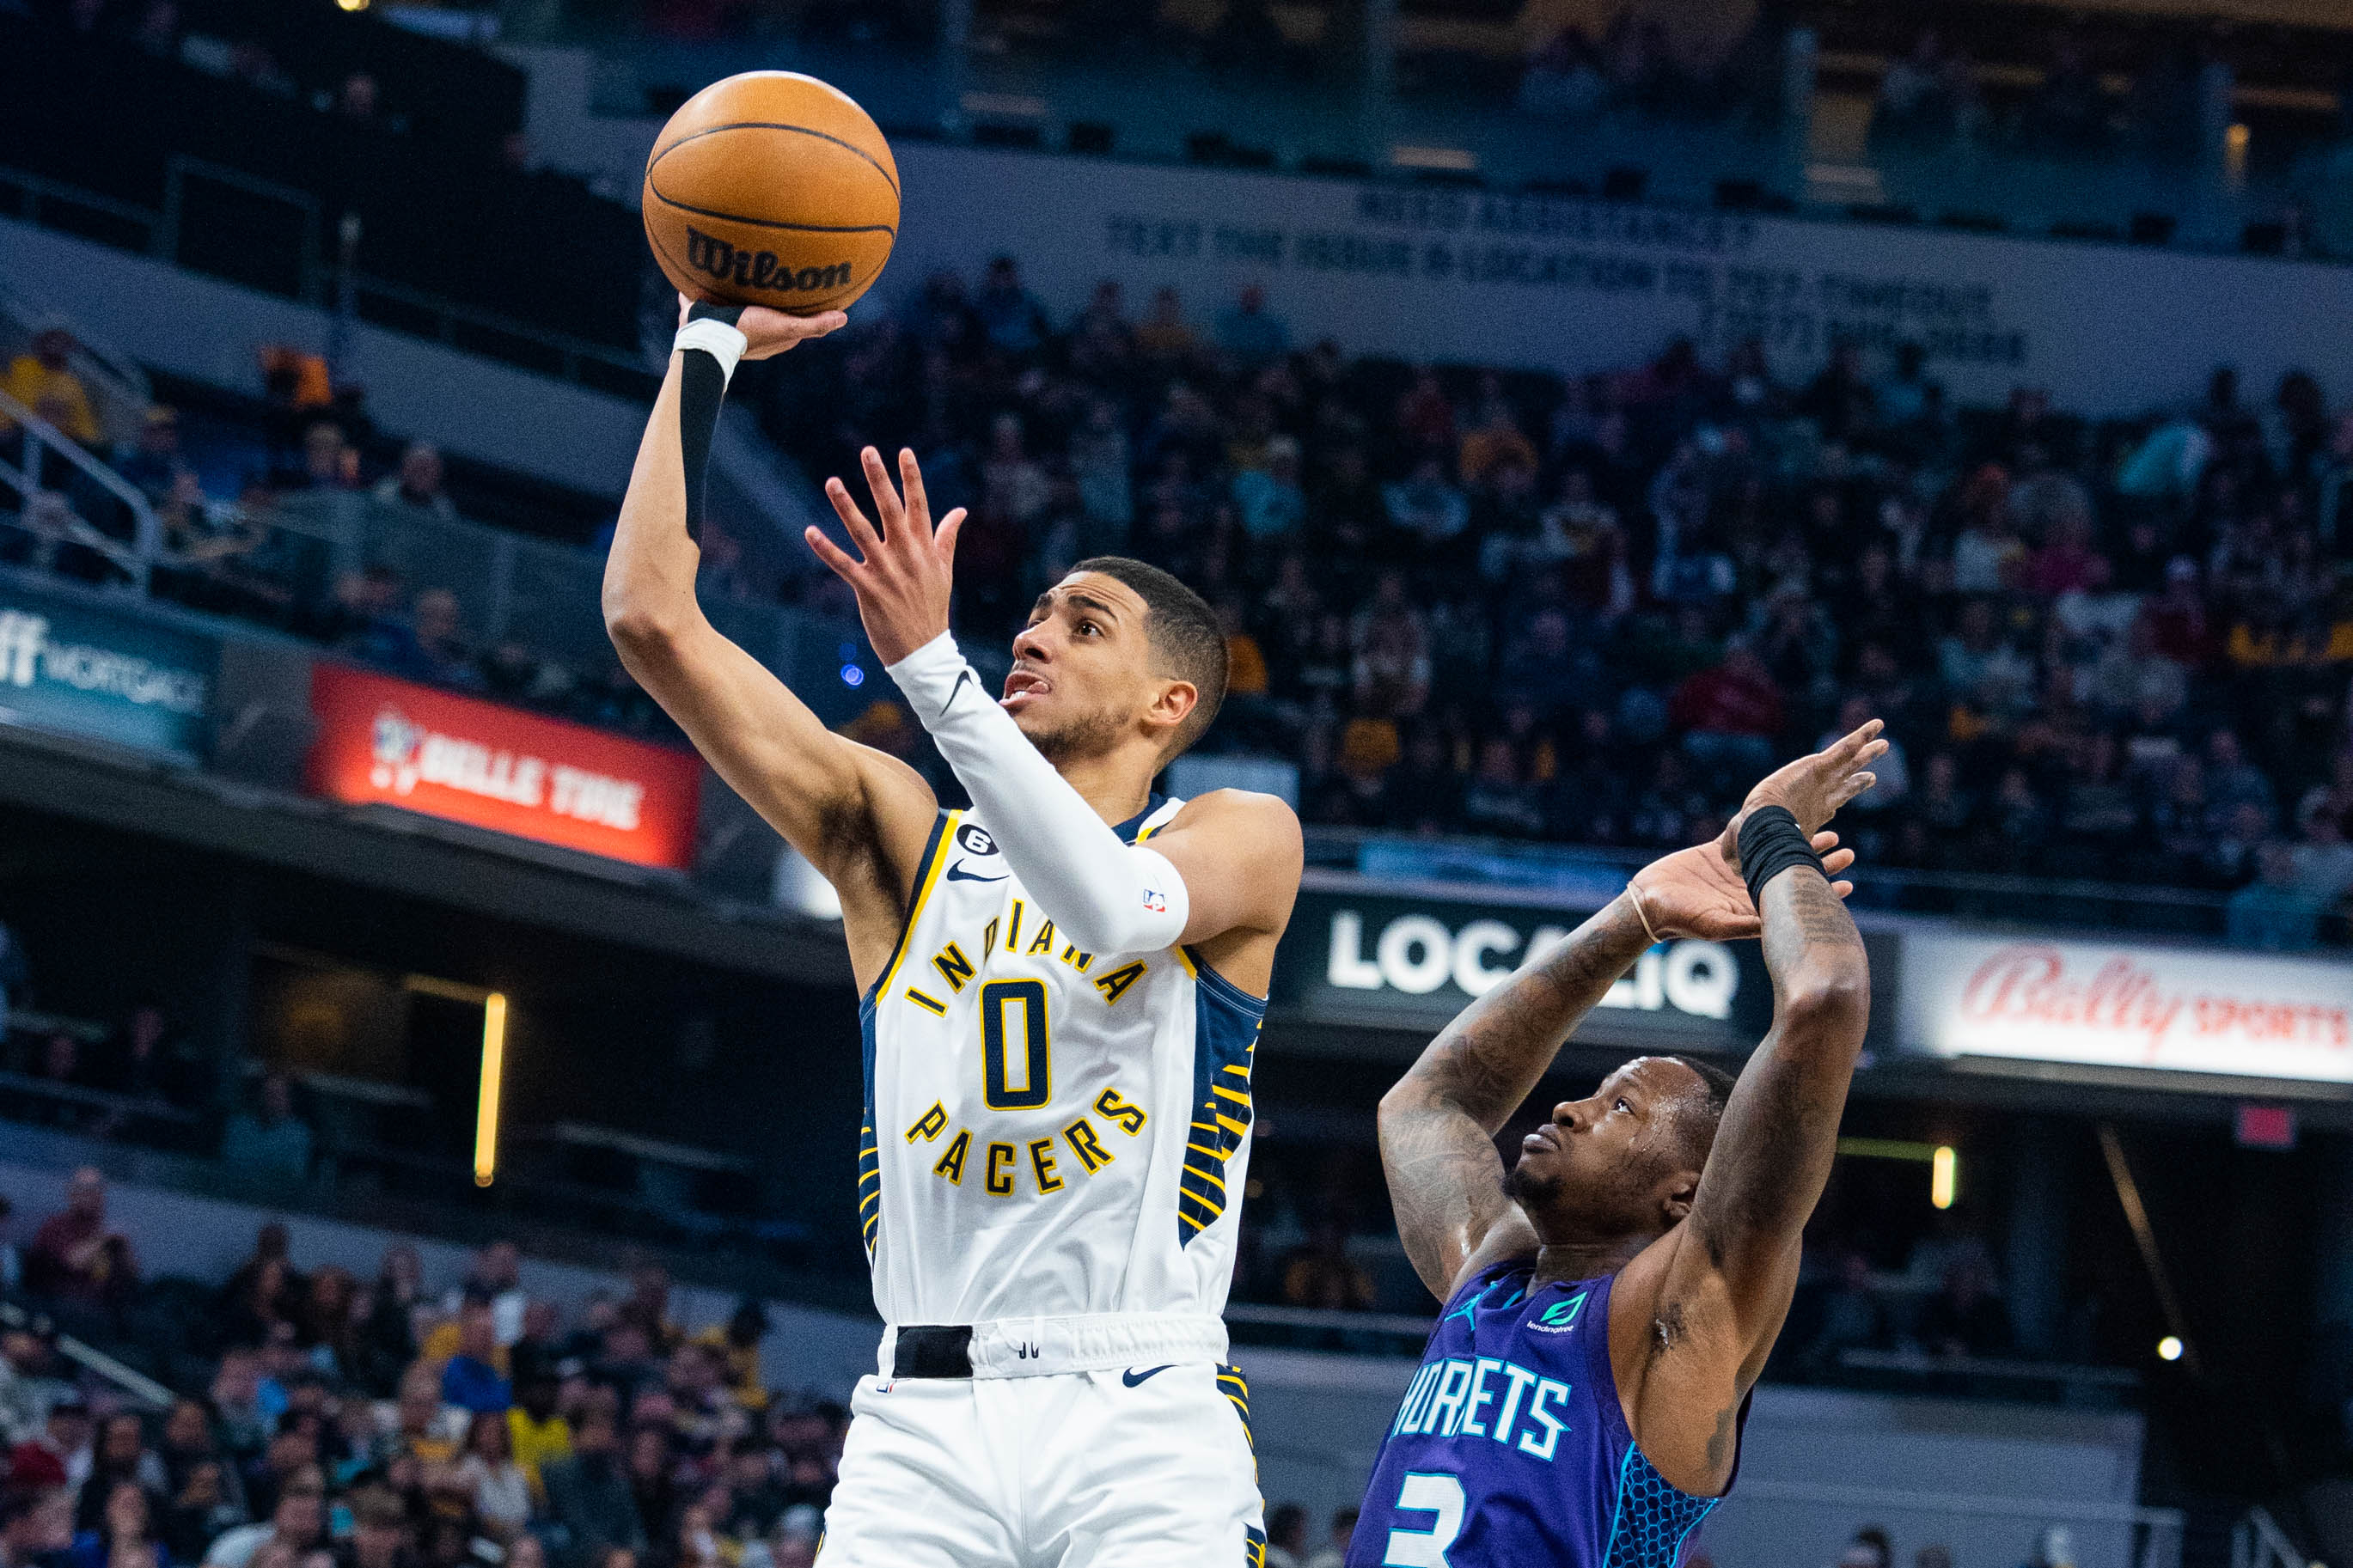 Pacers visit Pelicans in NBA action